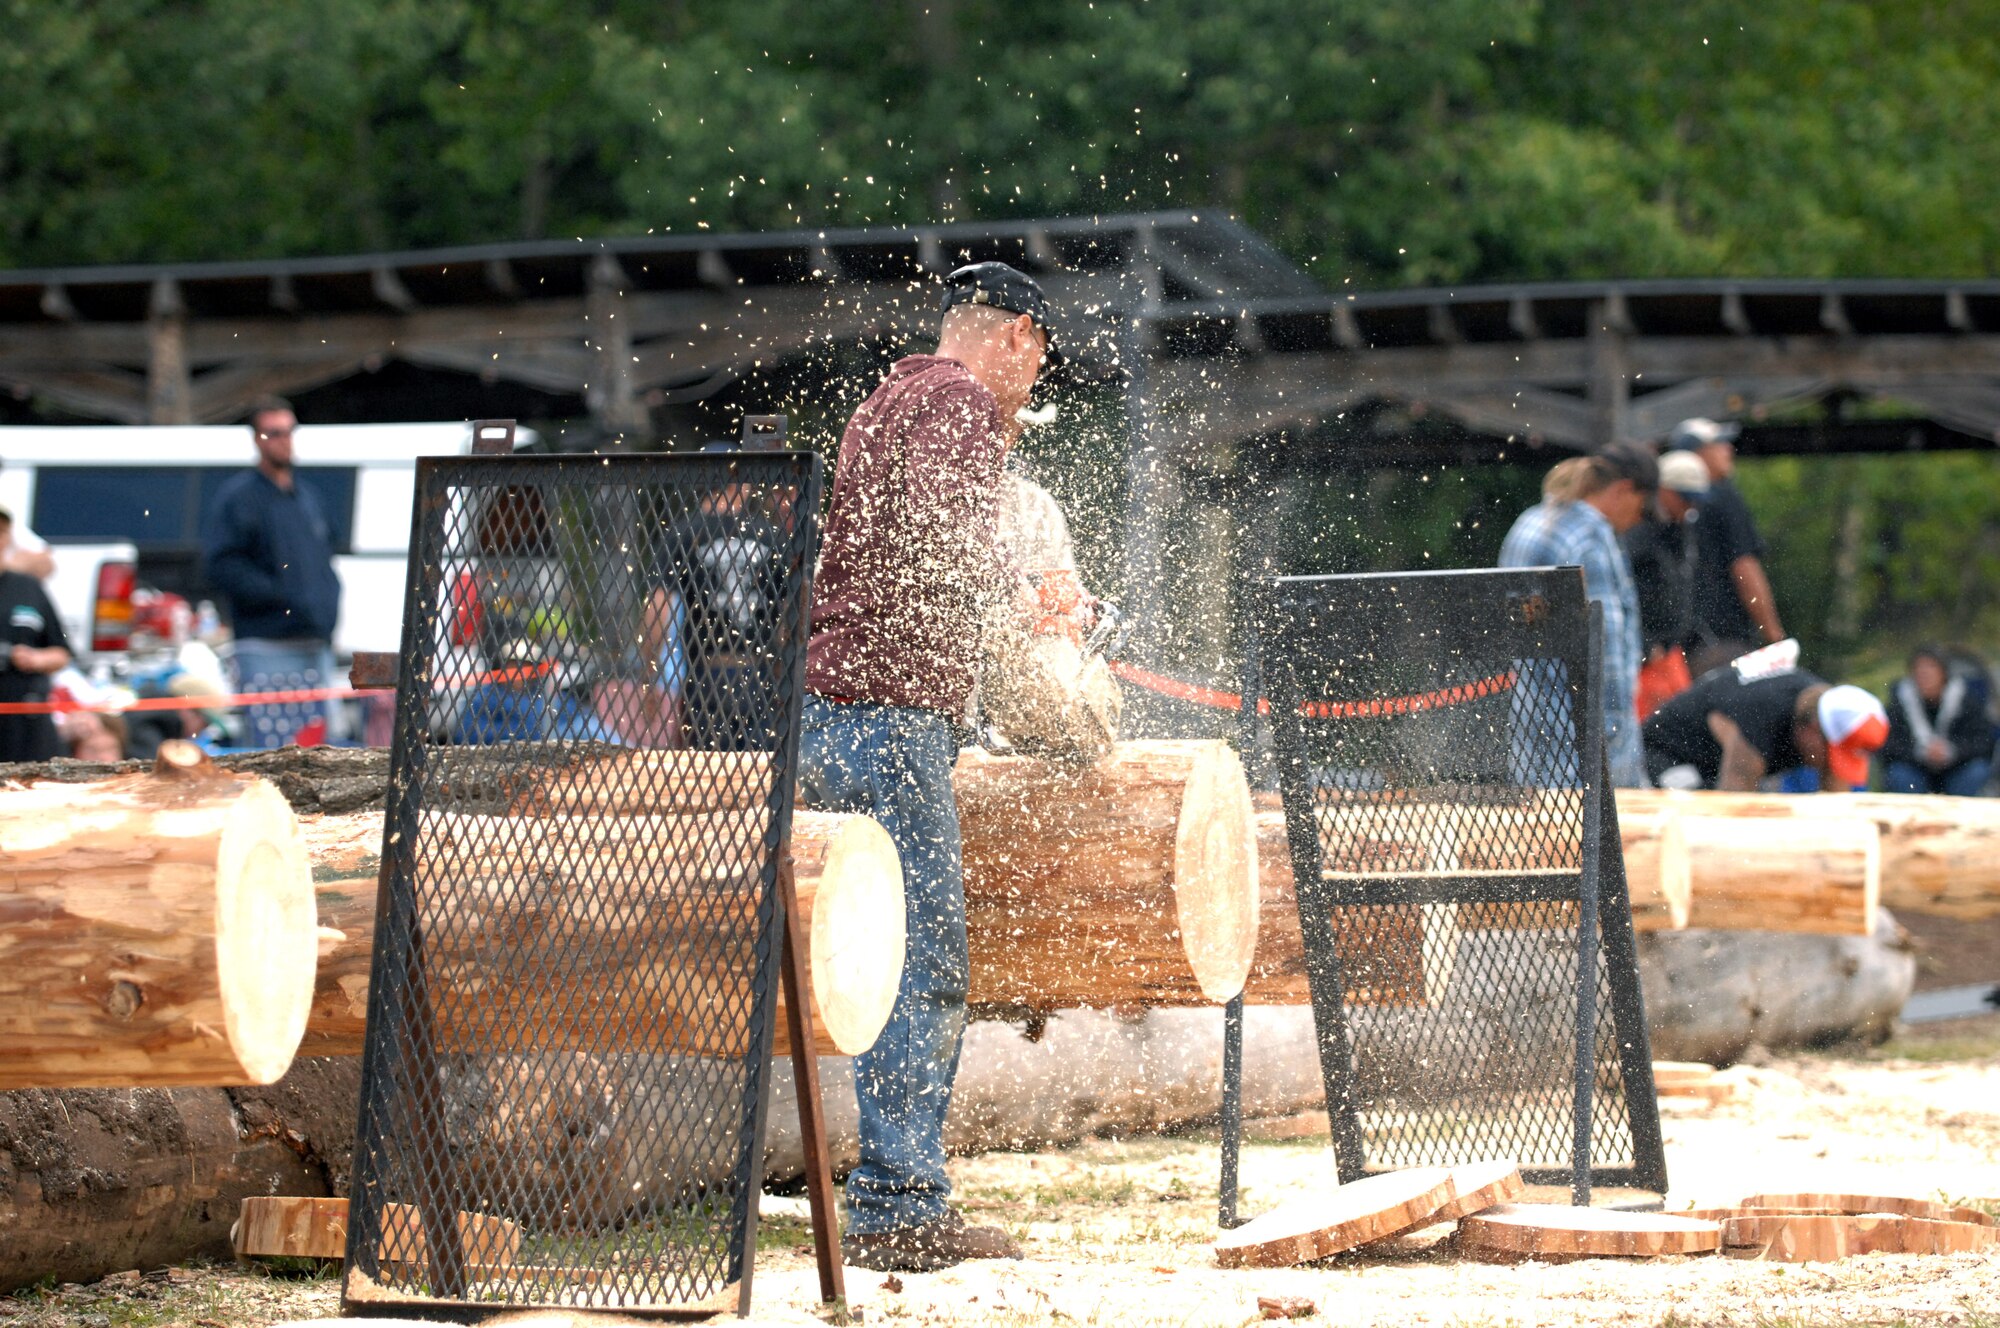 Vince Lenzo, participant of the Lumberjack Day event, saws down the pine wood for one of the many lumberjack competitions held in Cloudcroft, N.M., September 20. Contestants hold onto their chainsaws in hopes of winning the title for the 2008 Overall Lumberjack. (U.S. Air Force photo/Airman 1st. Class Veronica Salgado) 